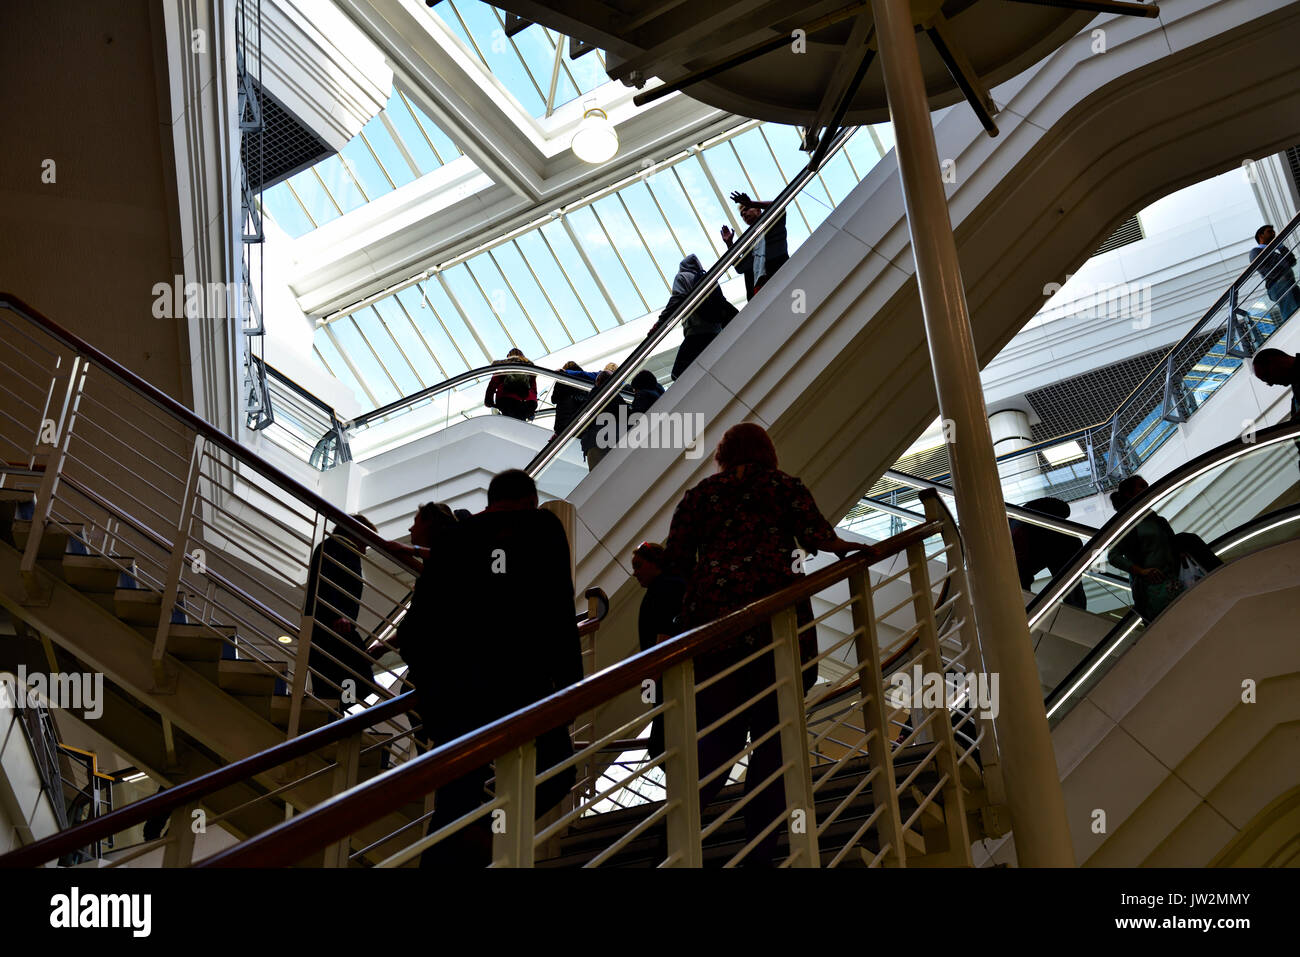 Stairs, escalators, people going up going down abstract Stock Photo